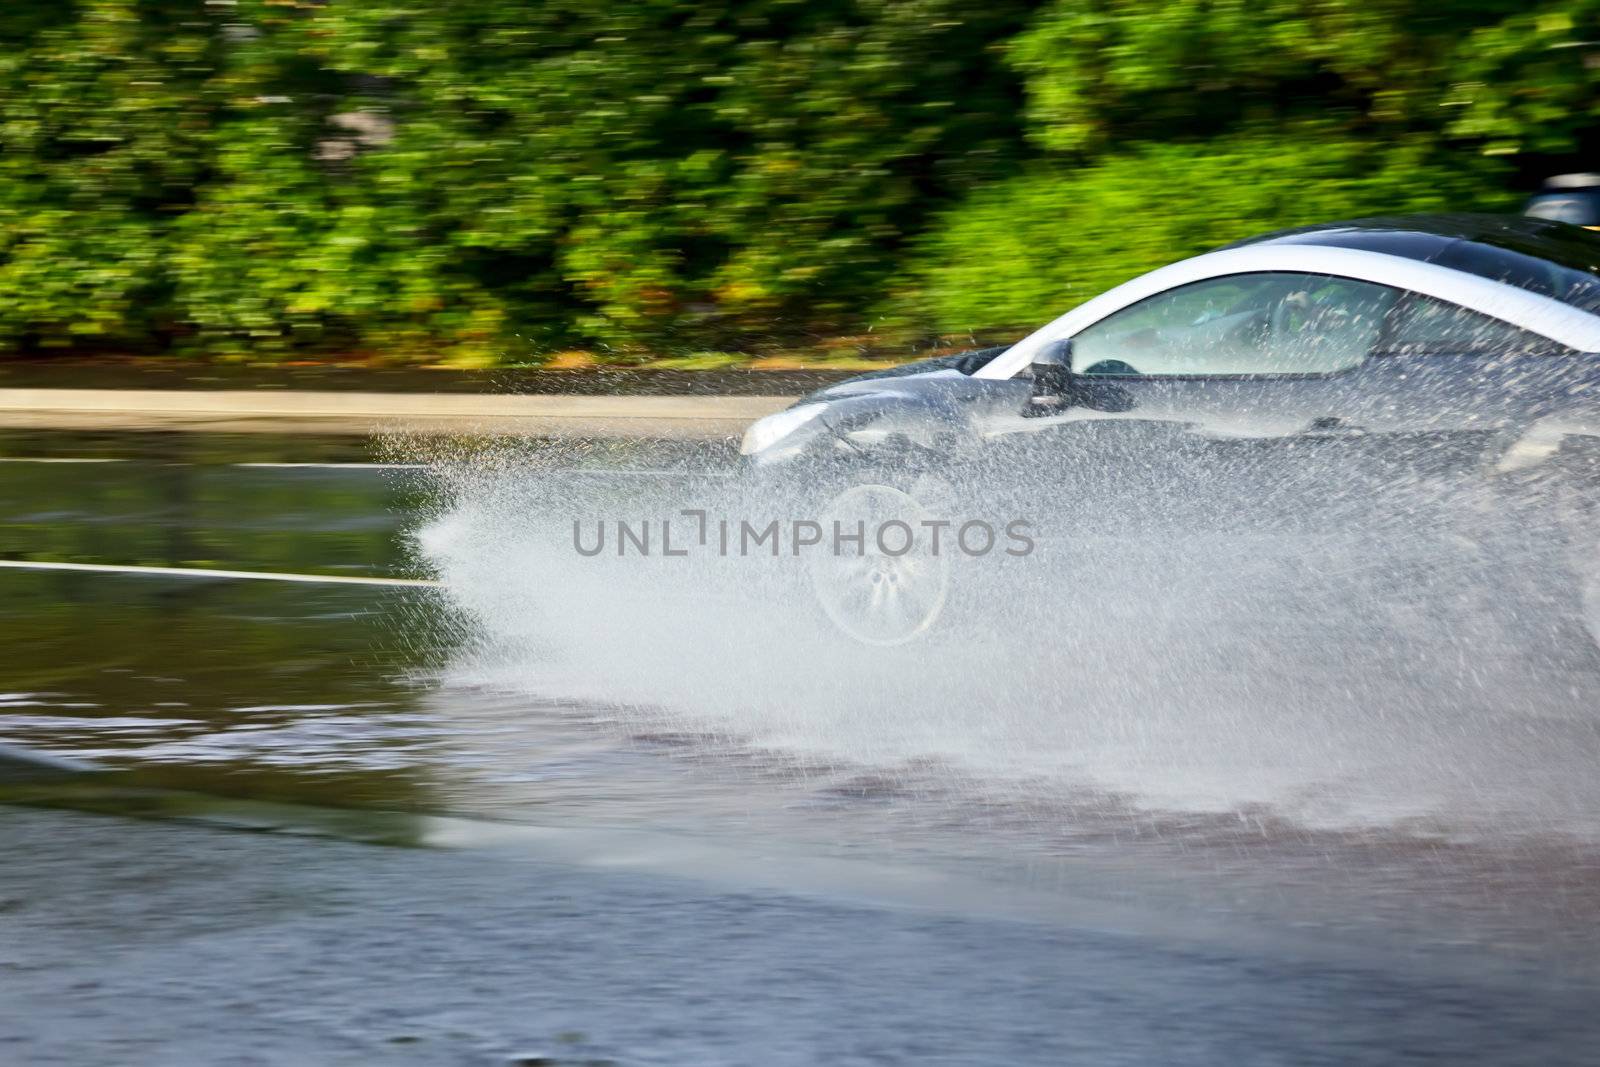 Moving car splashes on a flooded street